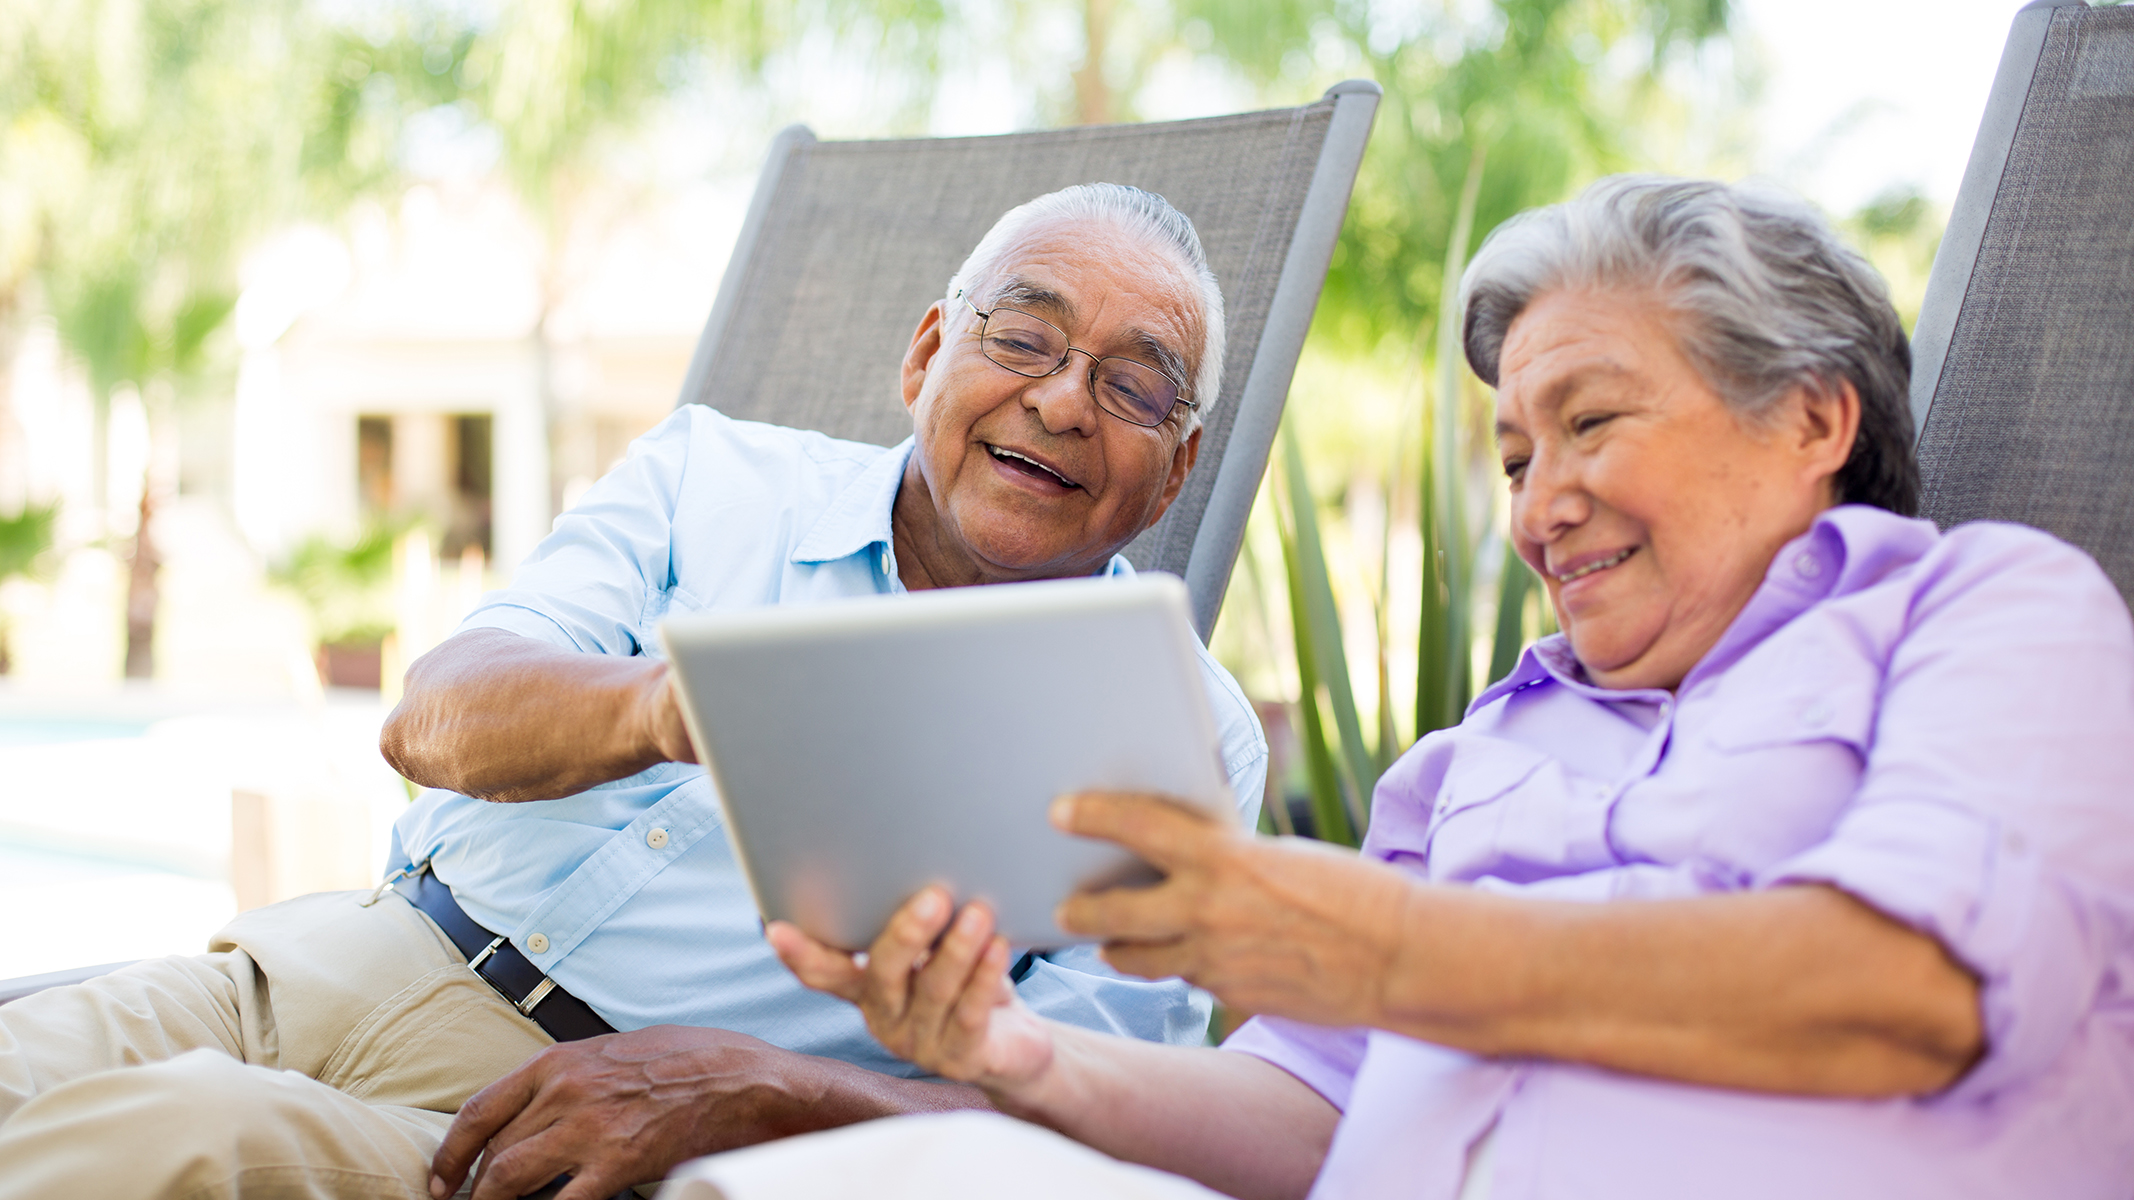  Senior couple looking at a tablet